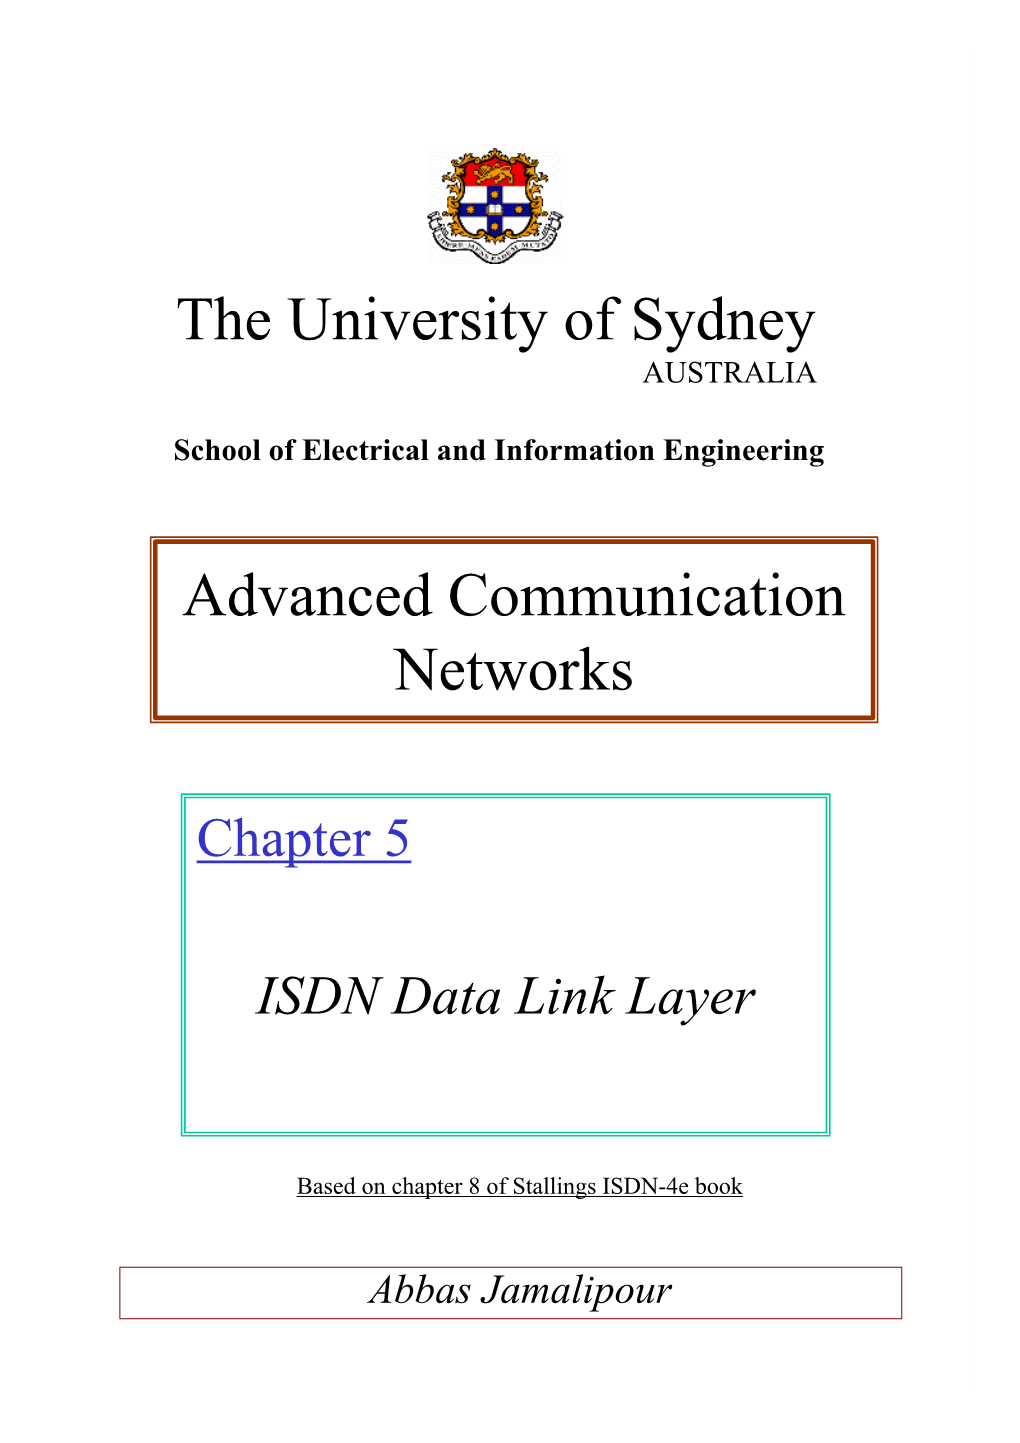 Chapter 8 of Stallings ISDN-4E Book